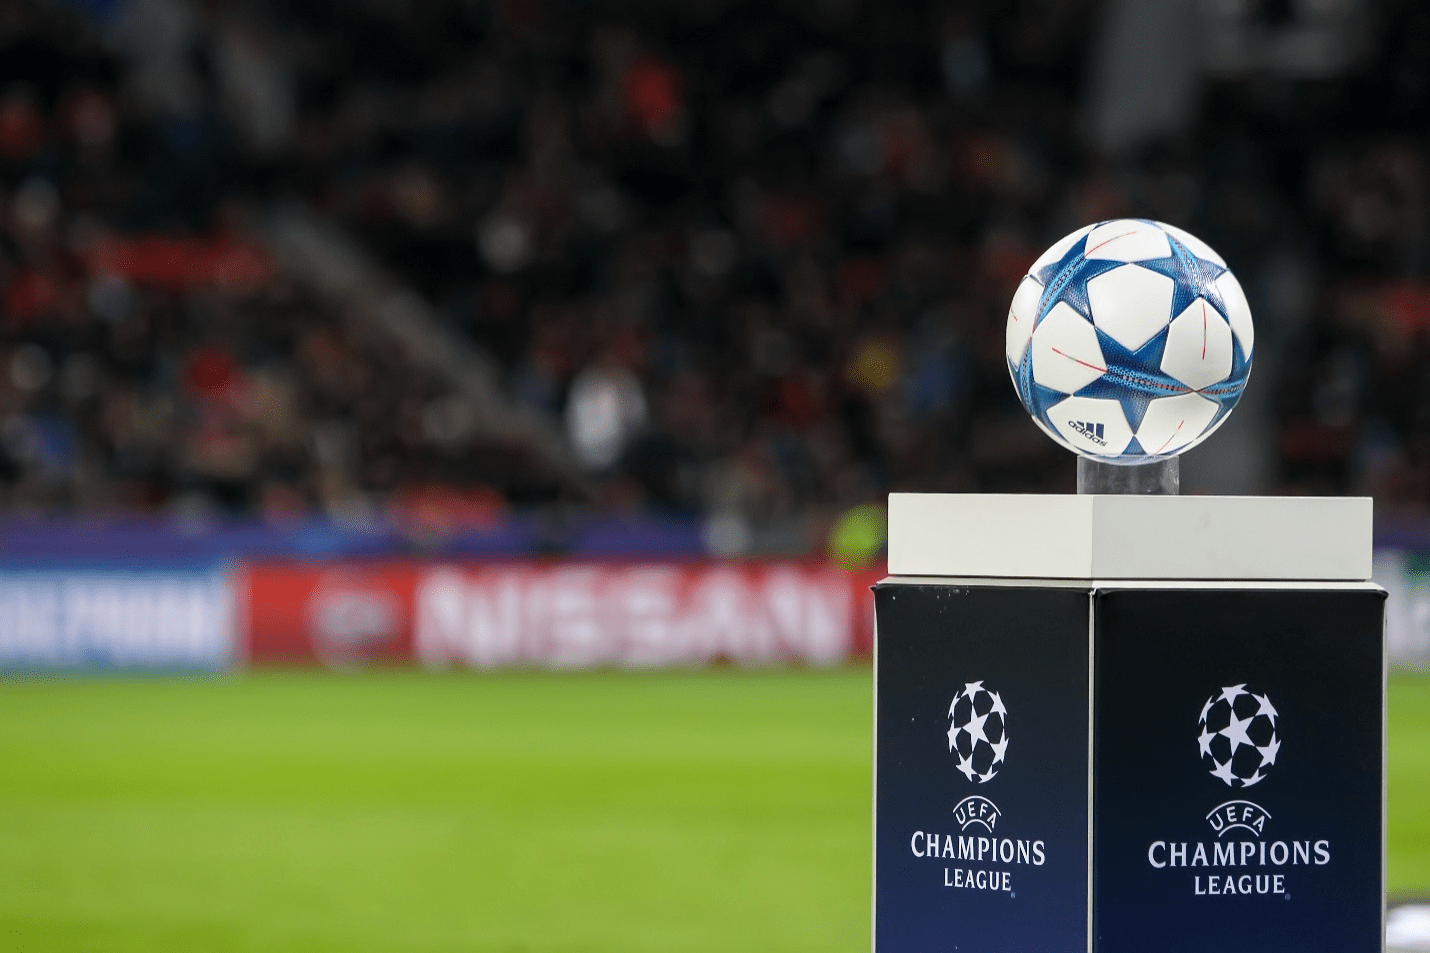 The Champions League Ball